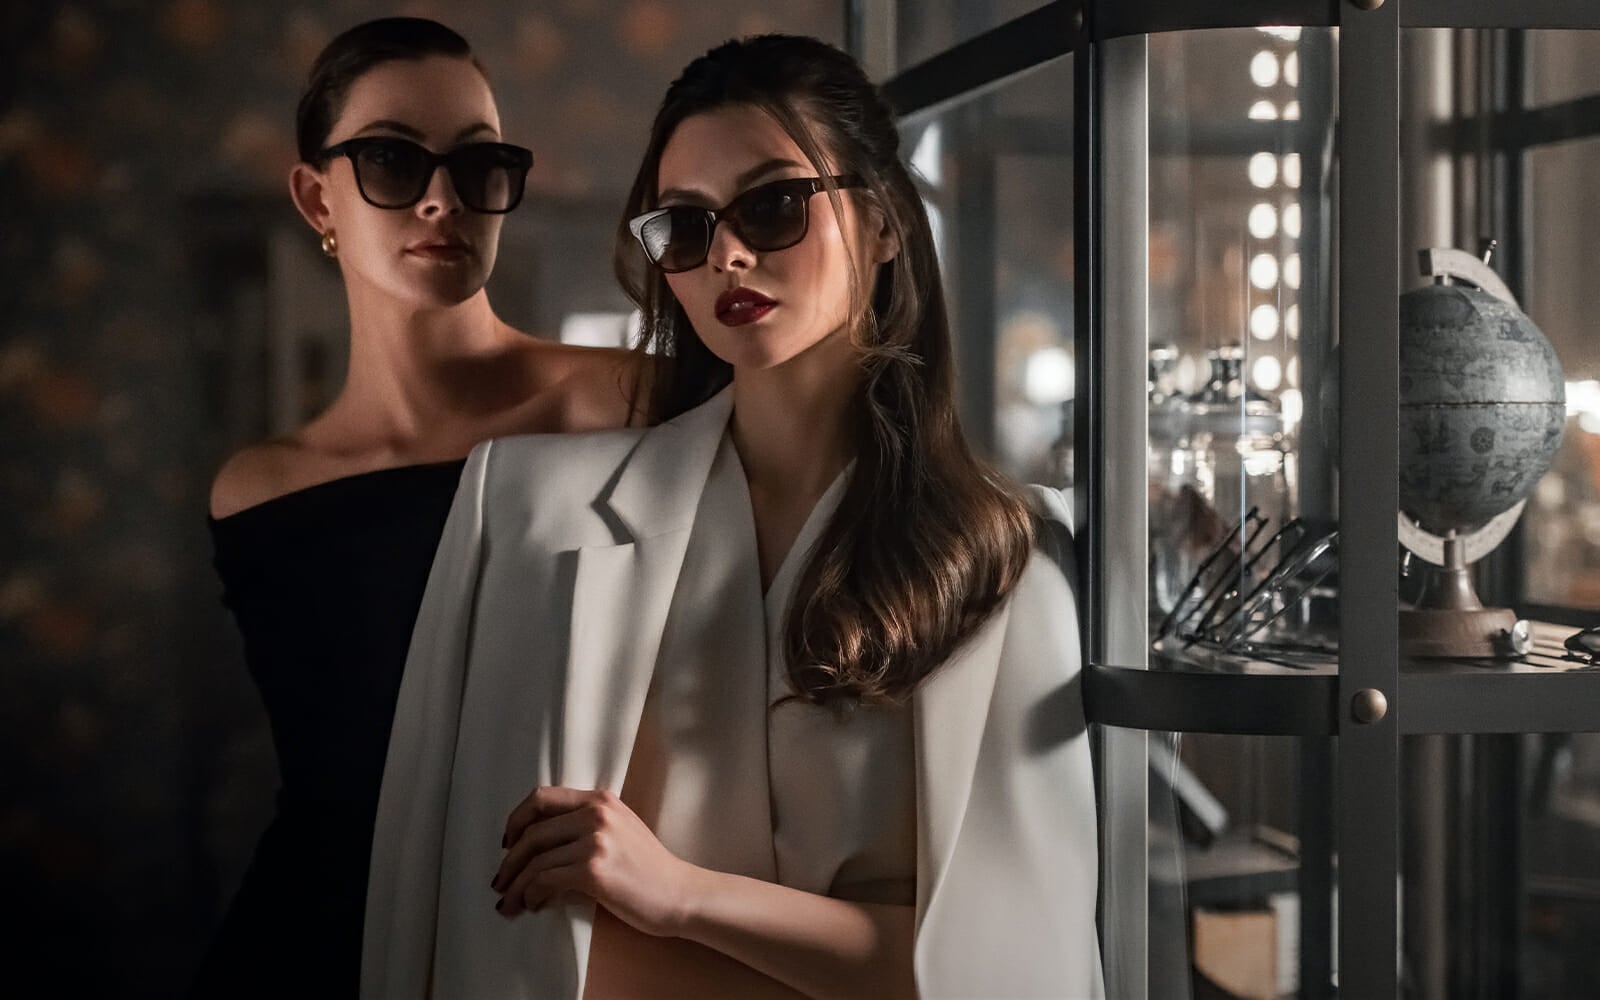 Two elegant women are standing next to a glass showcase. One is wearing a black strapless dress and the other a white suite. Both are wearing dark sunglasses.